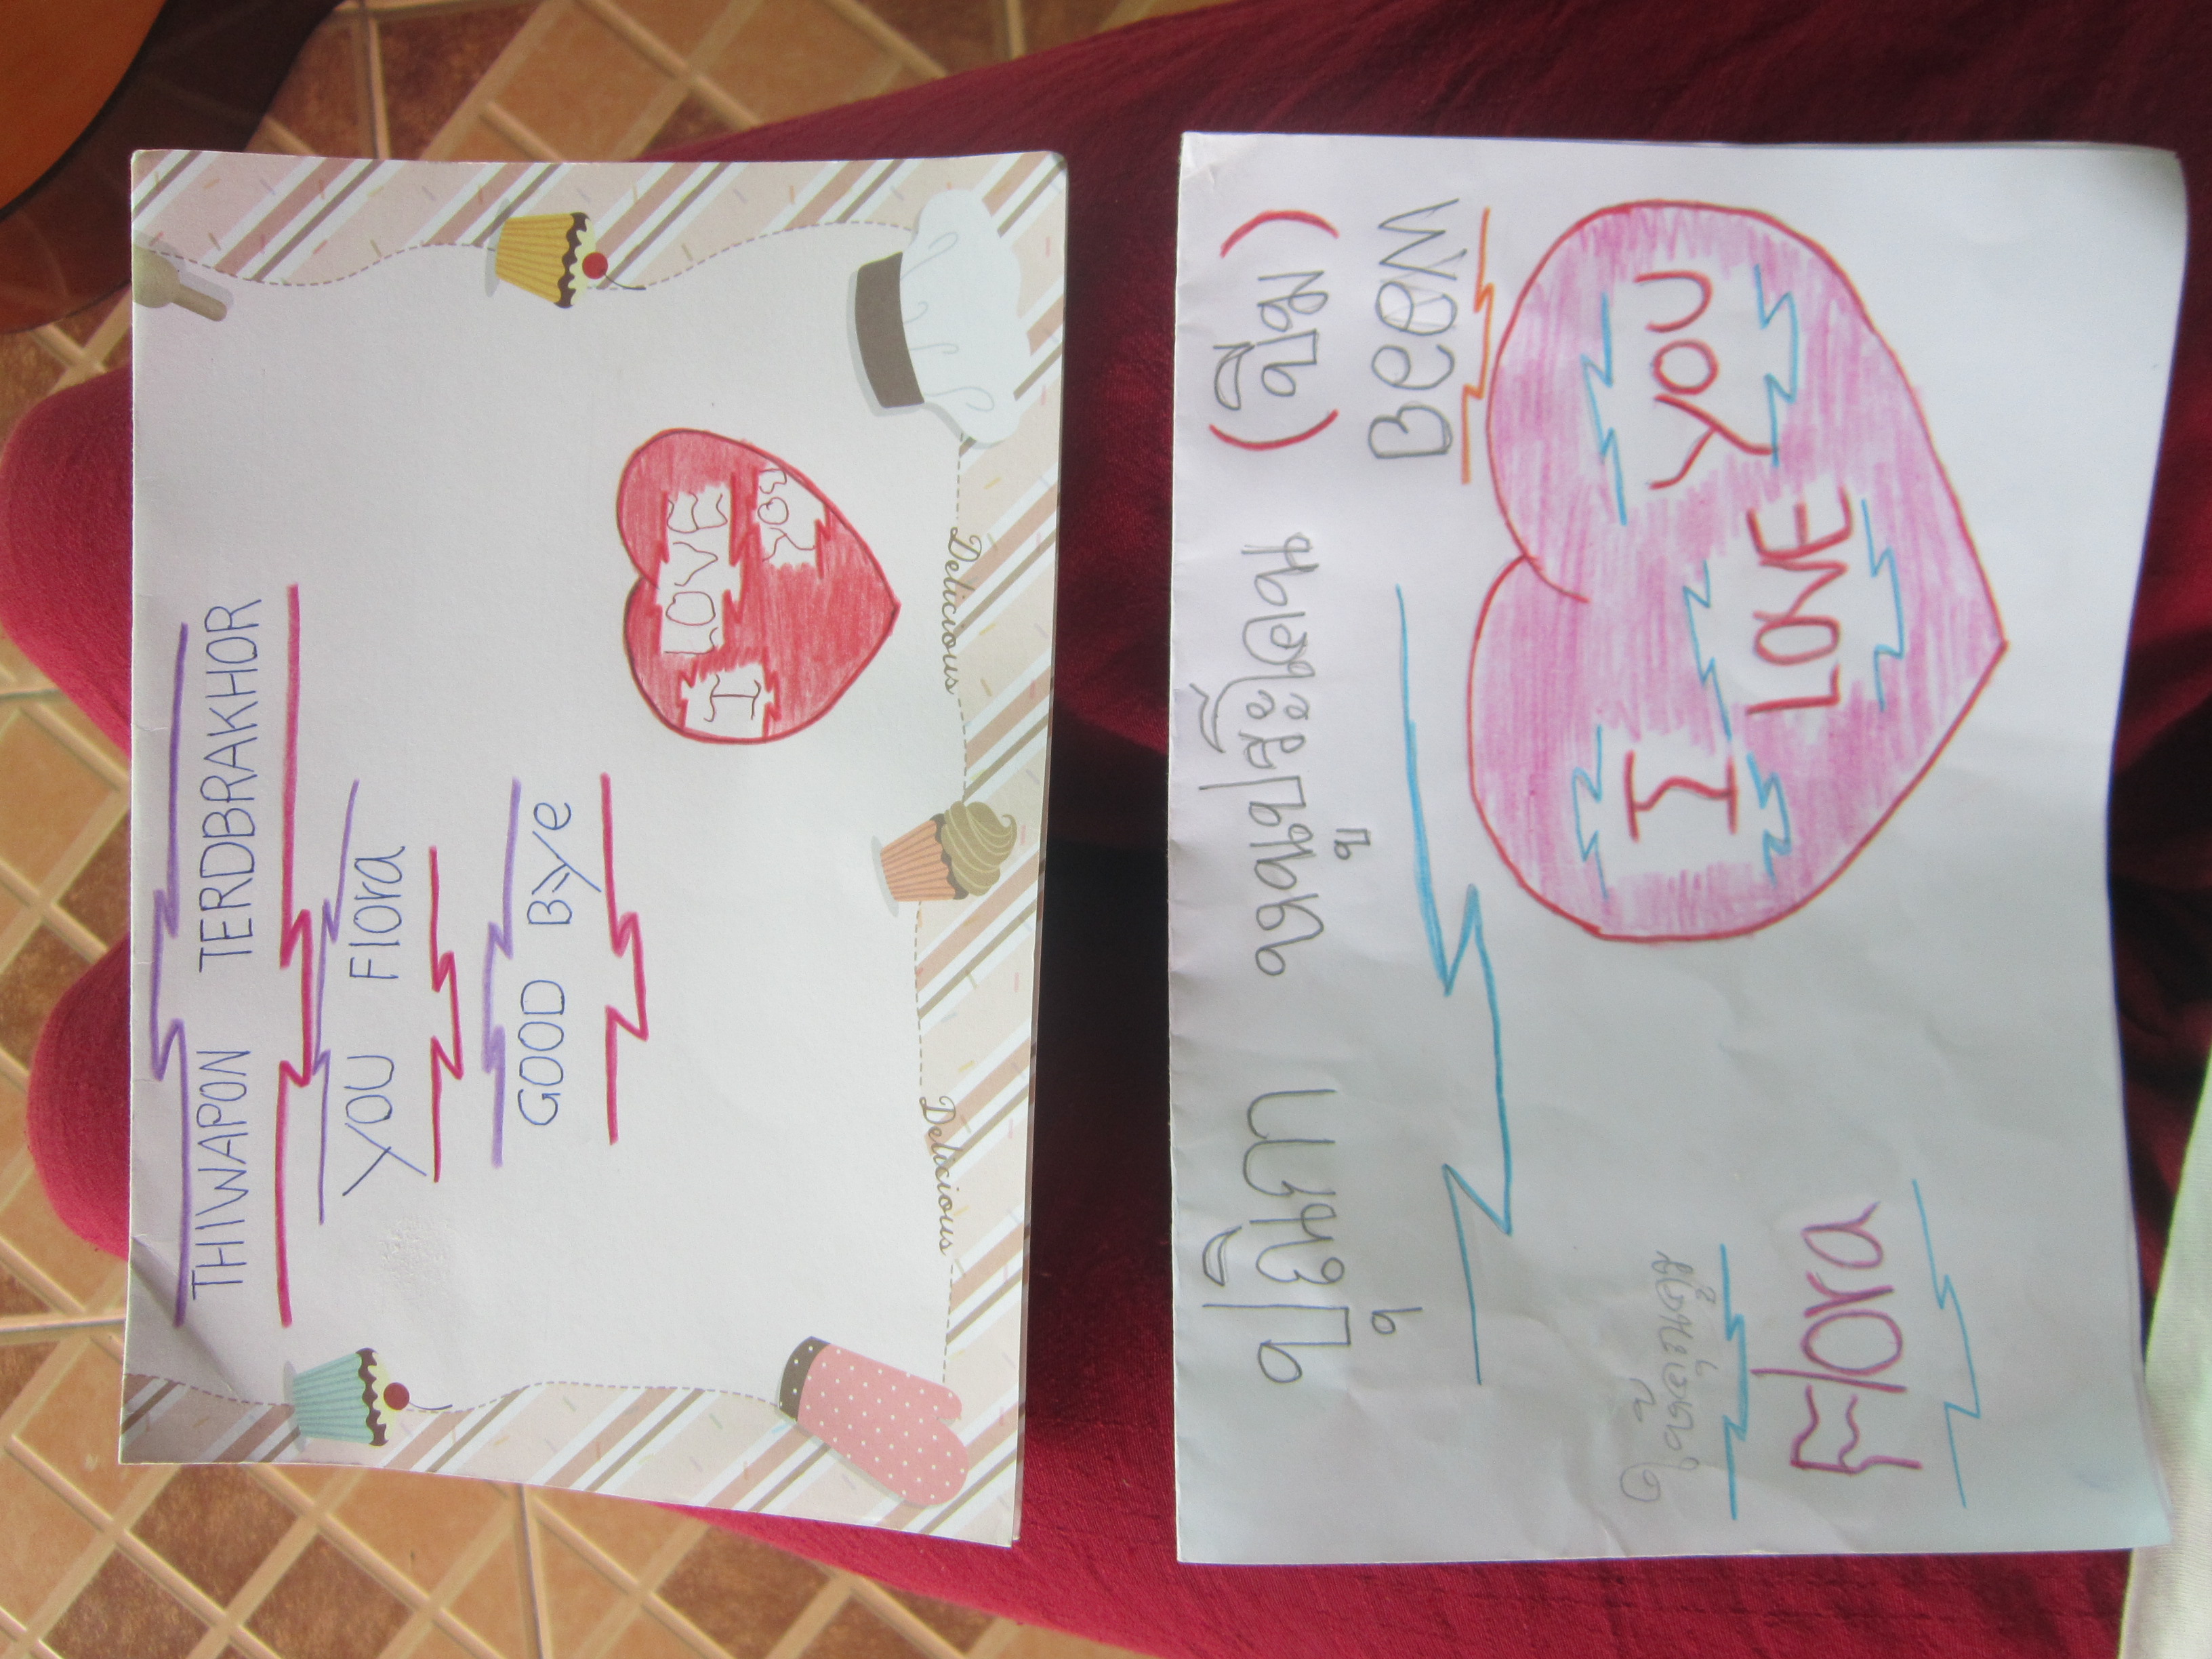 Goodbye cards from Thai school children in Nong Weang, Thailand